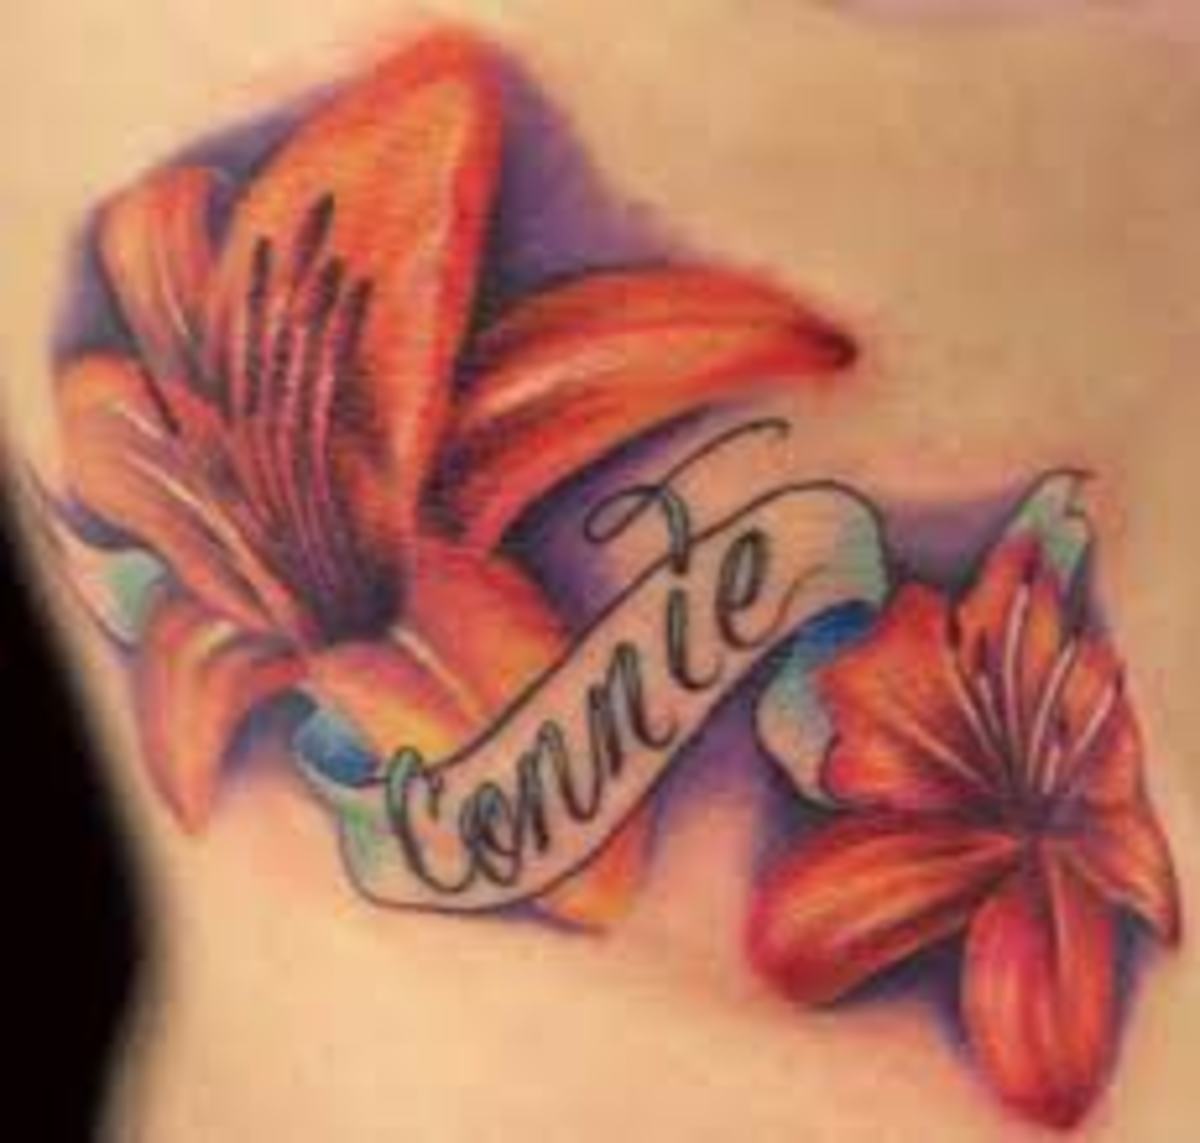 Name Tattoos-Name Tattoo Designs-Name Tattoo Meanings And Ideas - HubPages